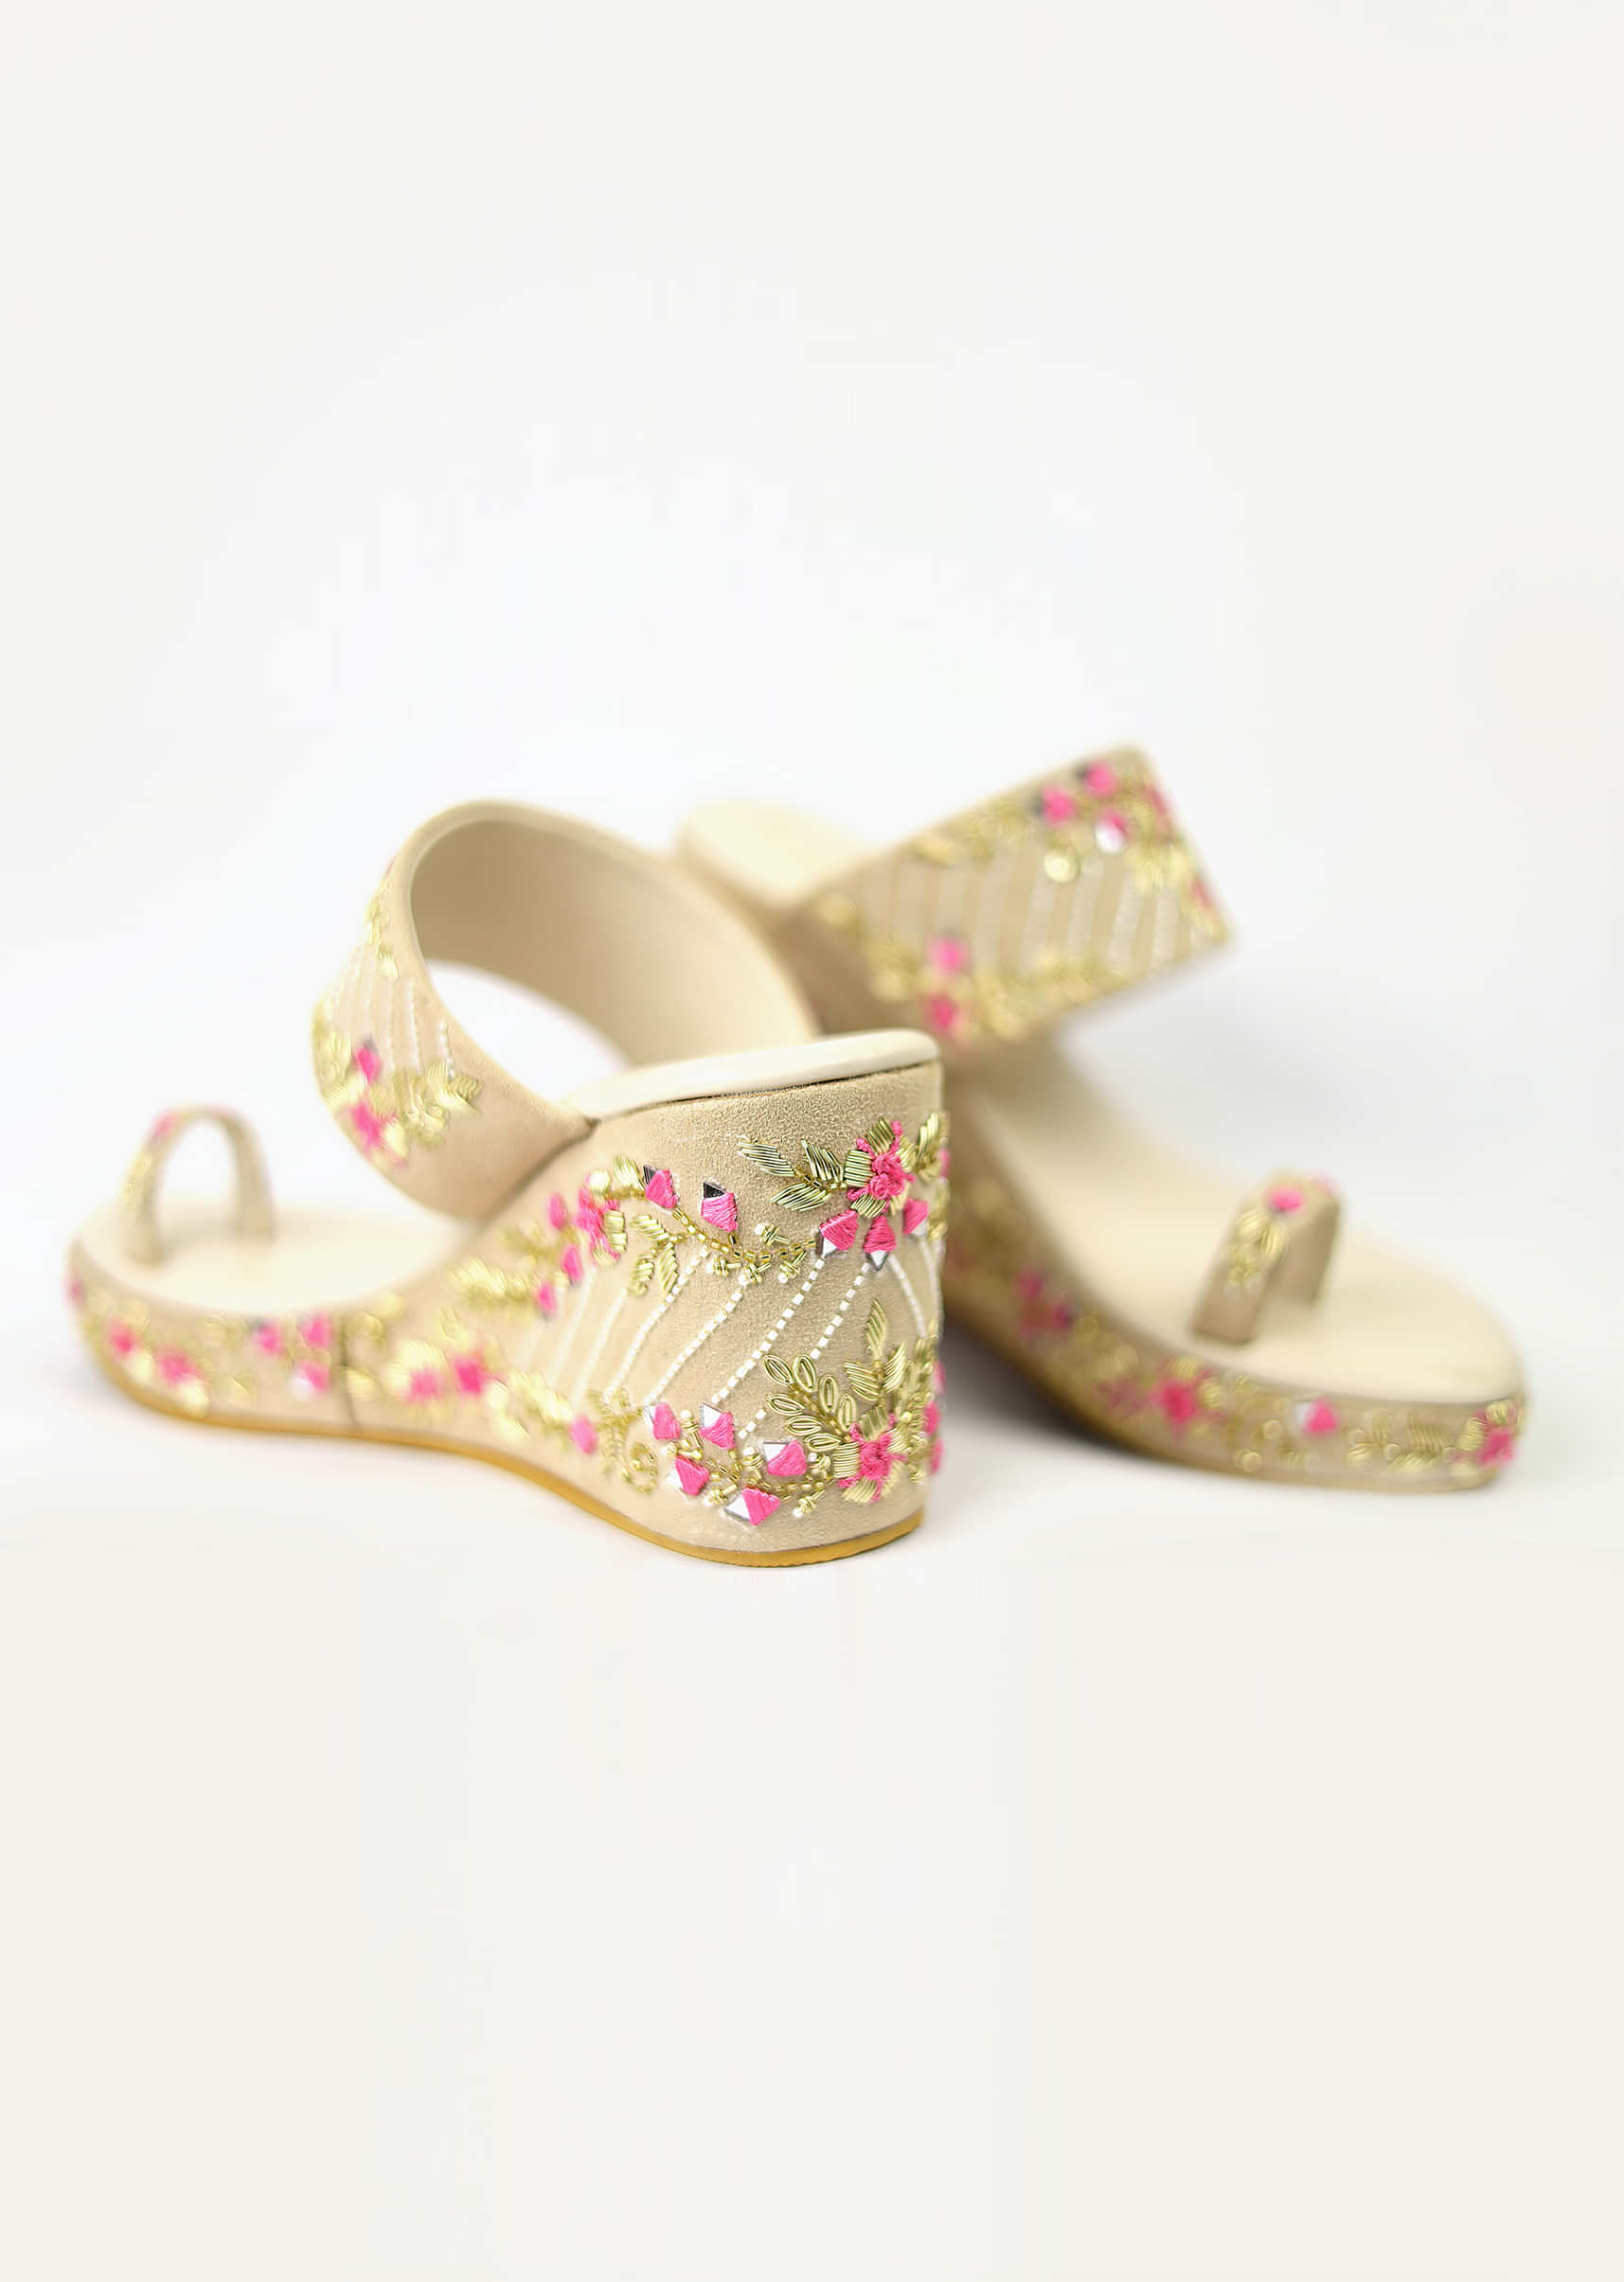 Cream White Thread And Zari Embroidered Suede Wedges